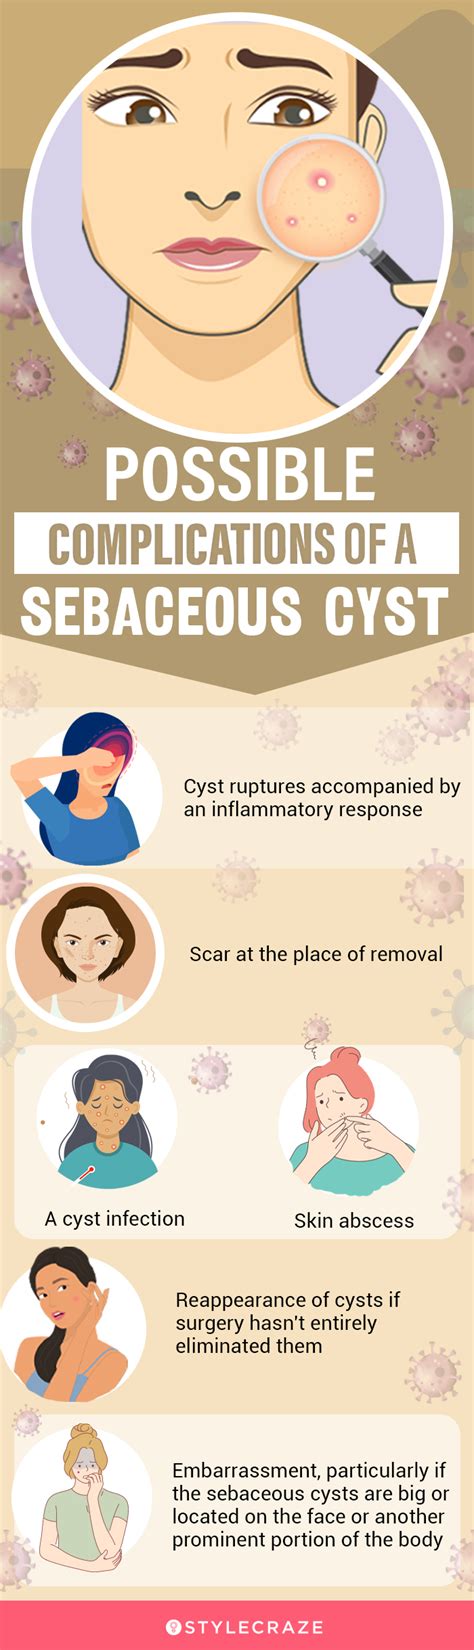 14 Home Remedies To Treat Sebaceous Cysts